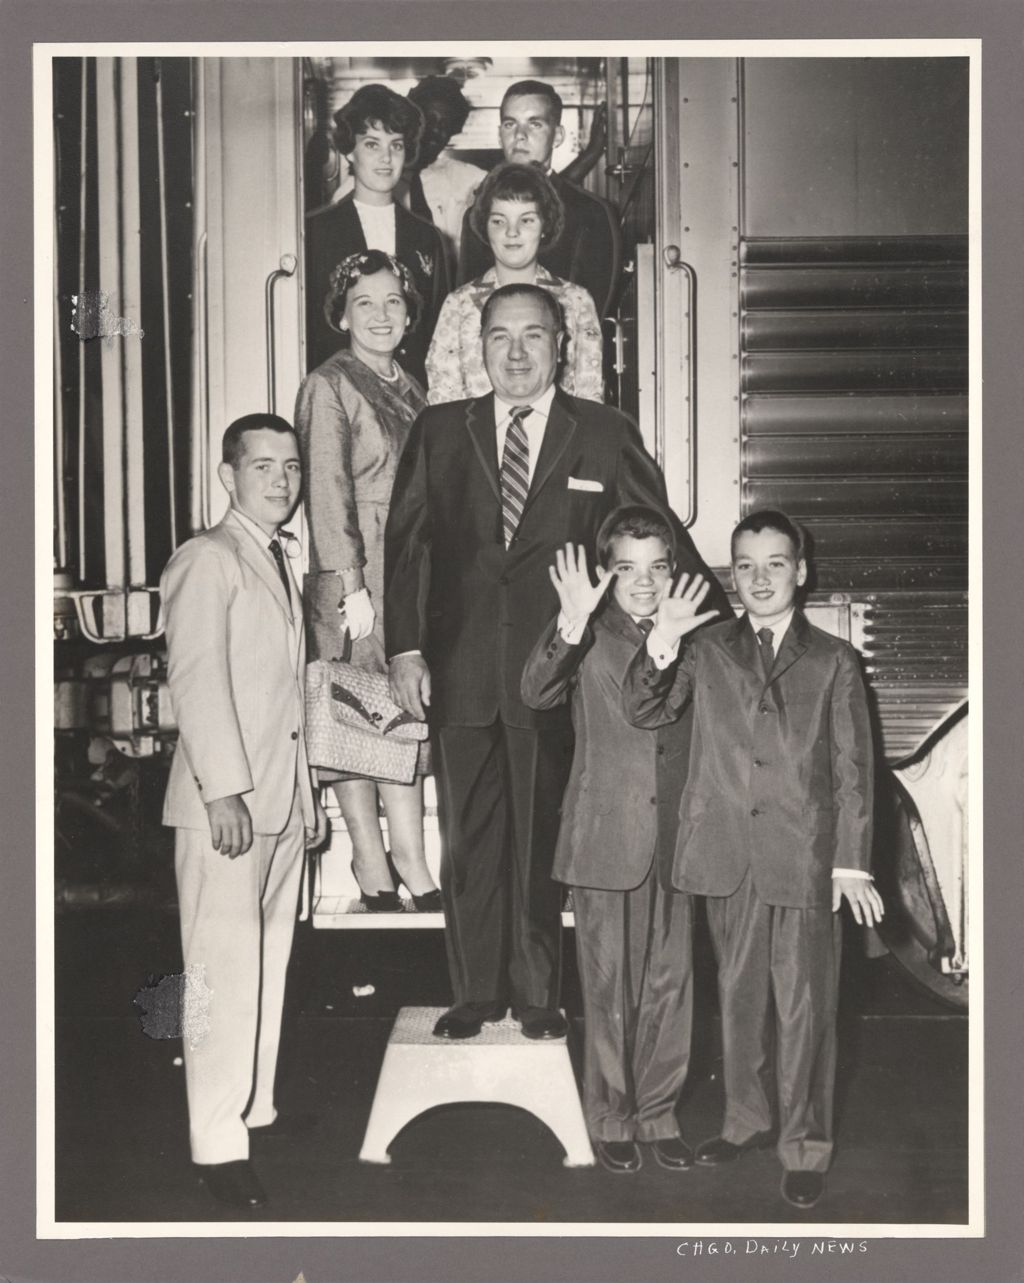 Miniature of Daley family travels to 1960 Democratic Convention